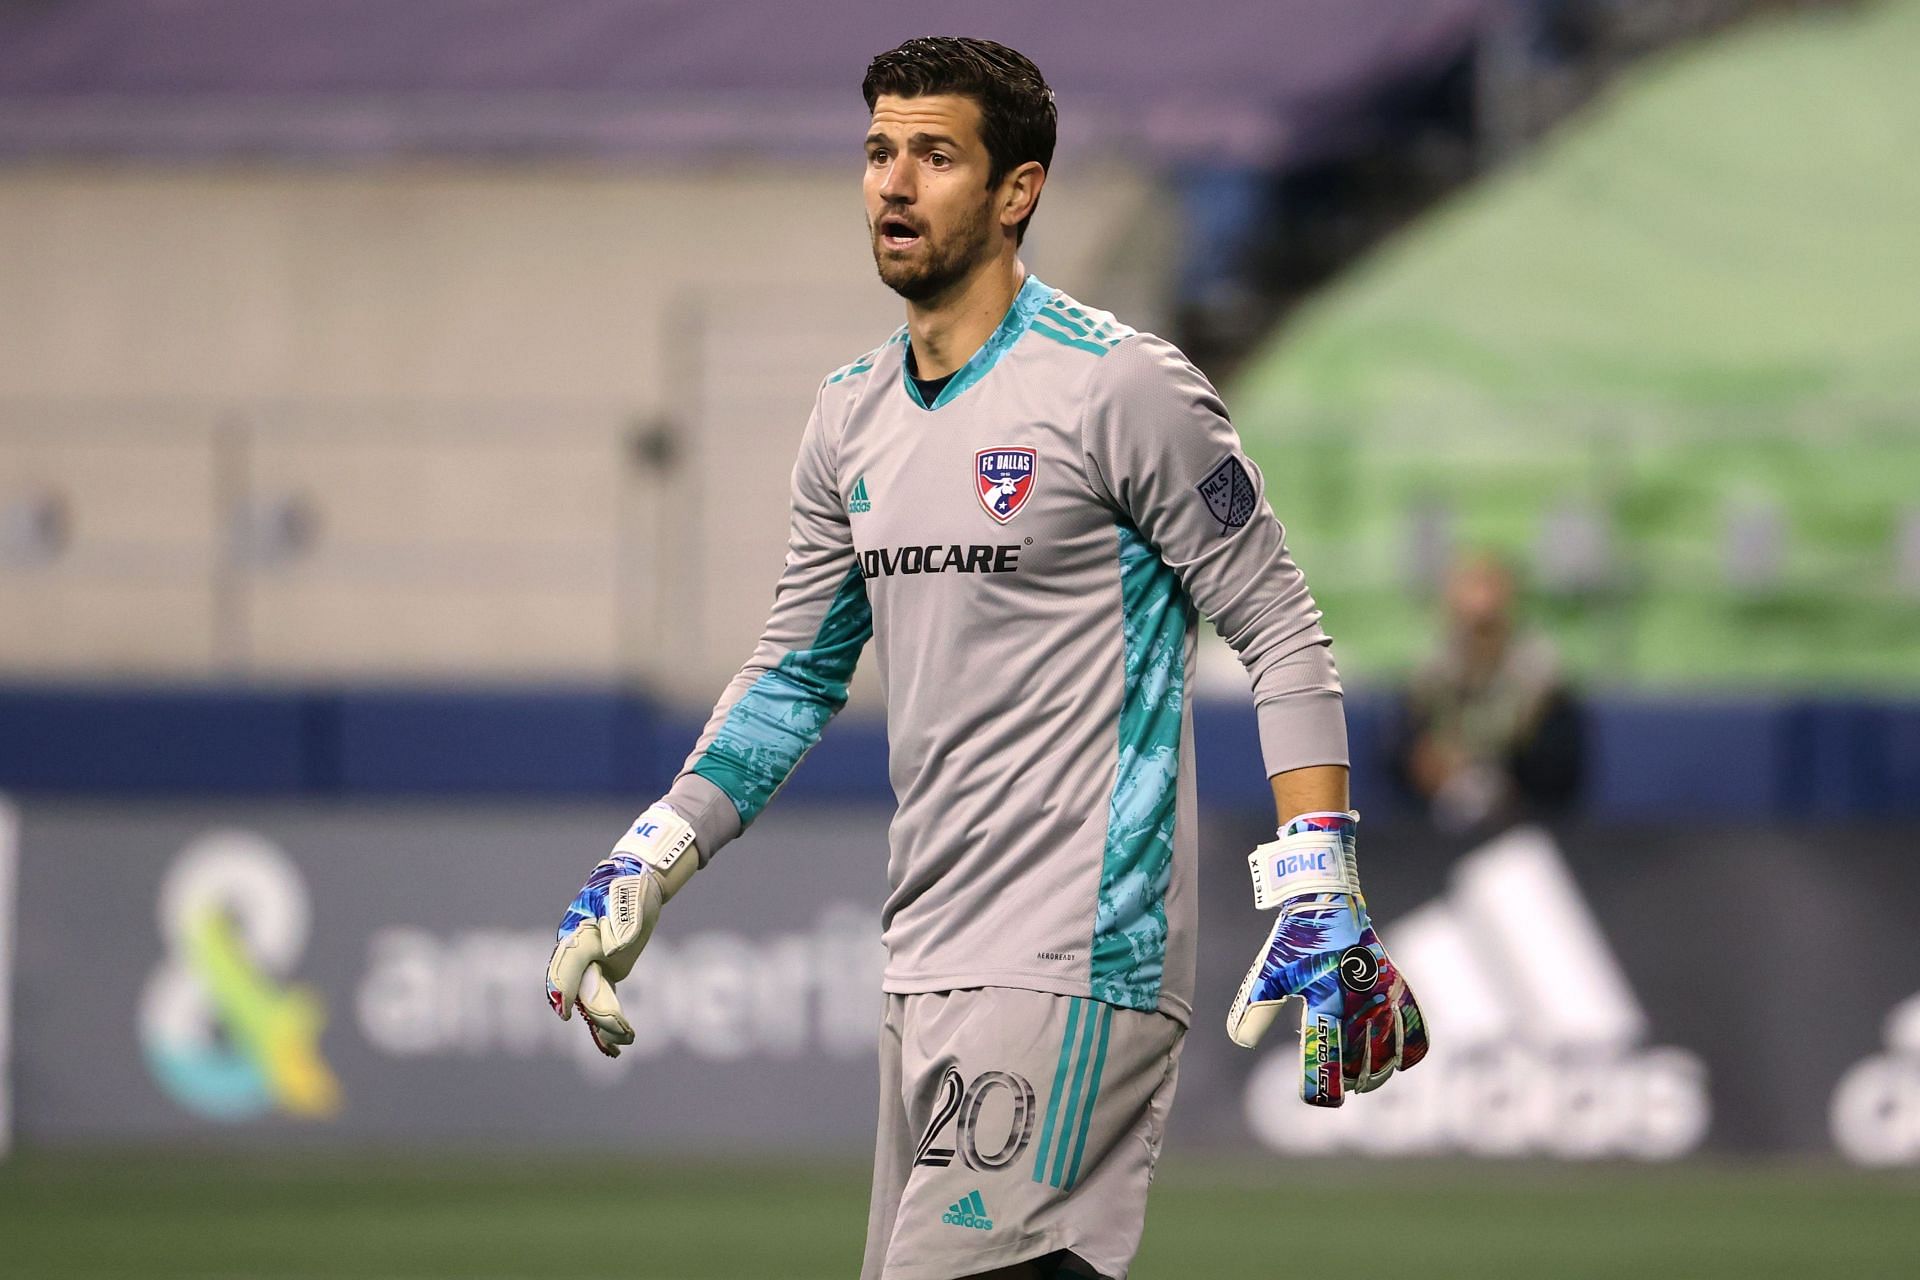 FC Dallas face Chicago Fire in their upcoming MLS fixture on Saturday